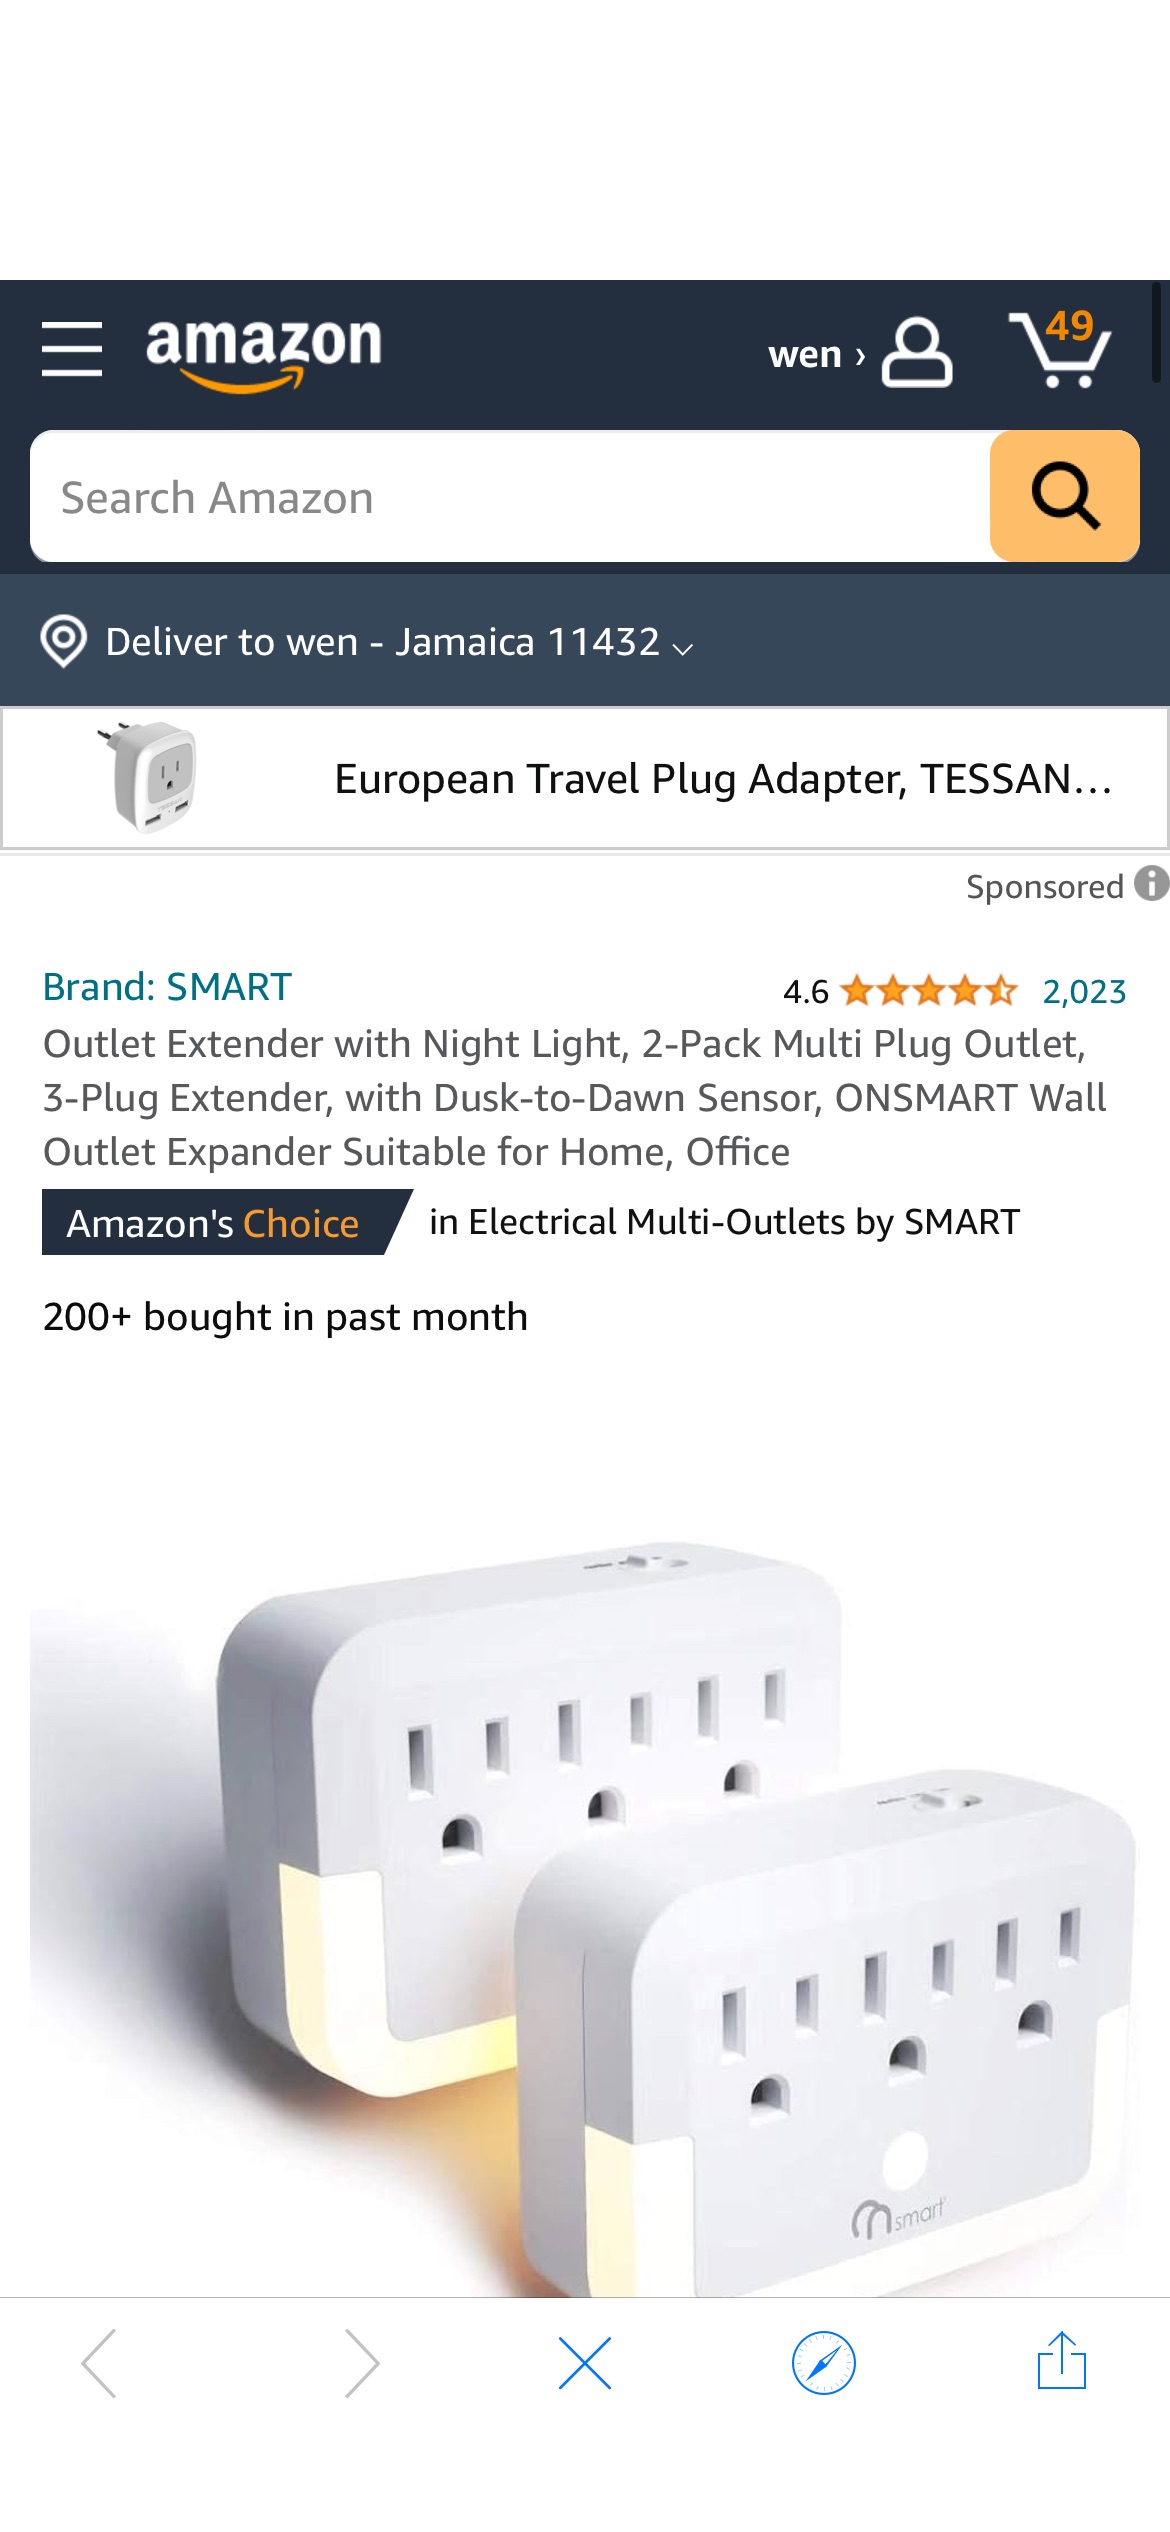 Outlet Extender with Night Light, 2-Pack Multi Plug Outlet, 3-Plug Extender, with Dusk-to-Dawn Sensor, ONSMART Wall Outlet Expander Suitable for Home, Office - Amazon.com